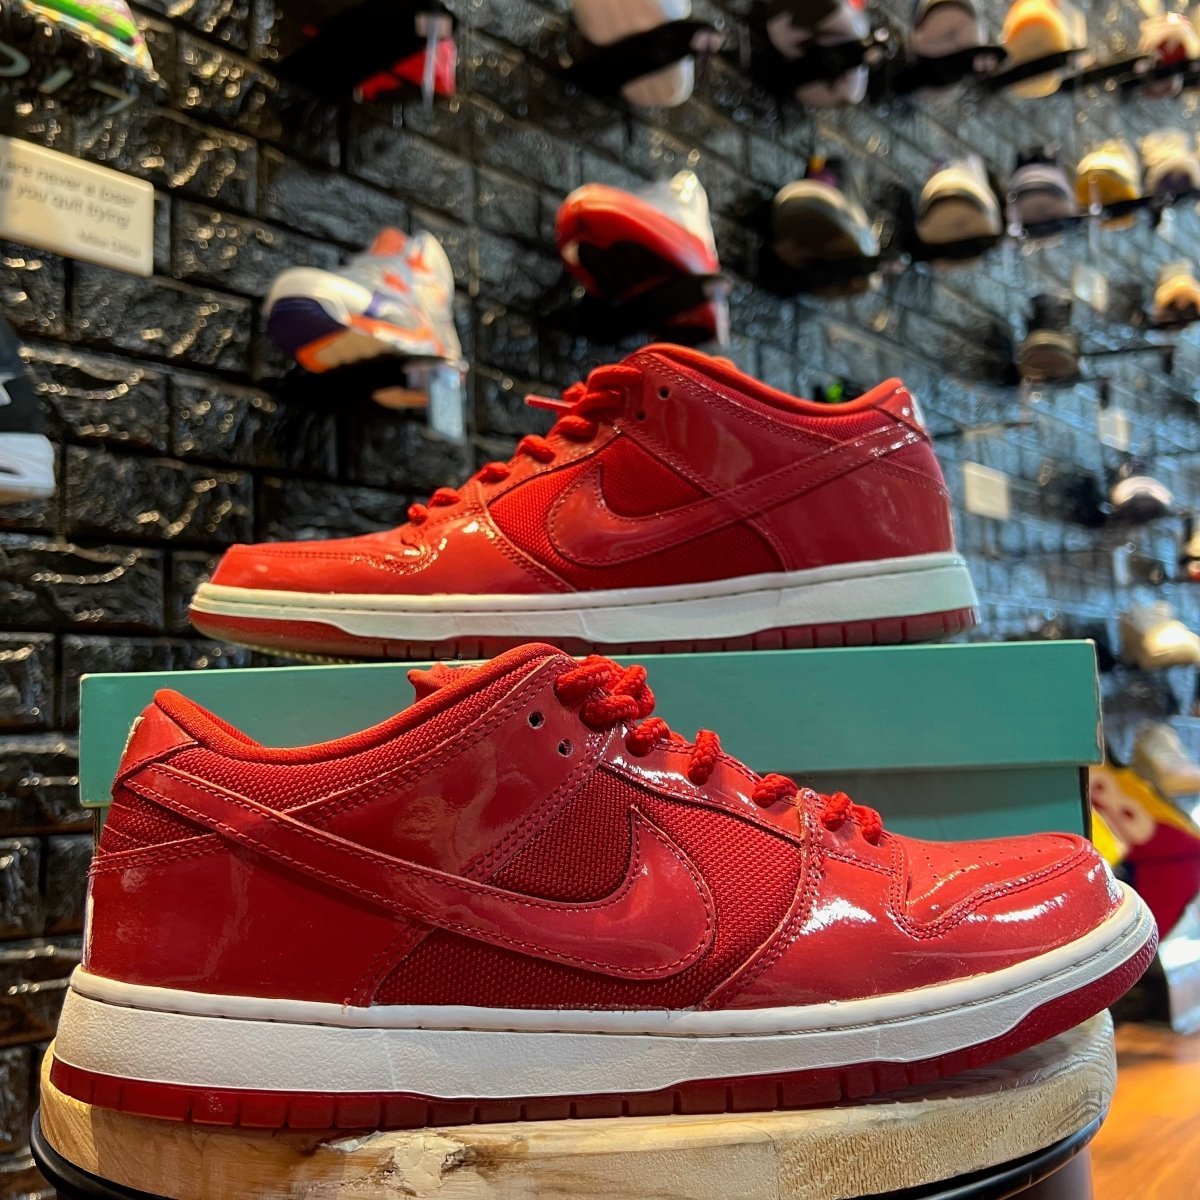 Dunk Low Pro SB 'Red Patent Leather'- Gently Enjoyed (Used) Men 11 - Low Sneaker - Jawns on Fire Sneakers & Streetwear